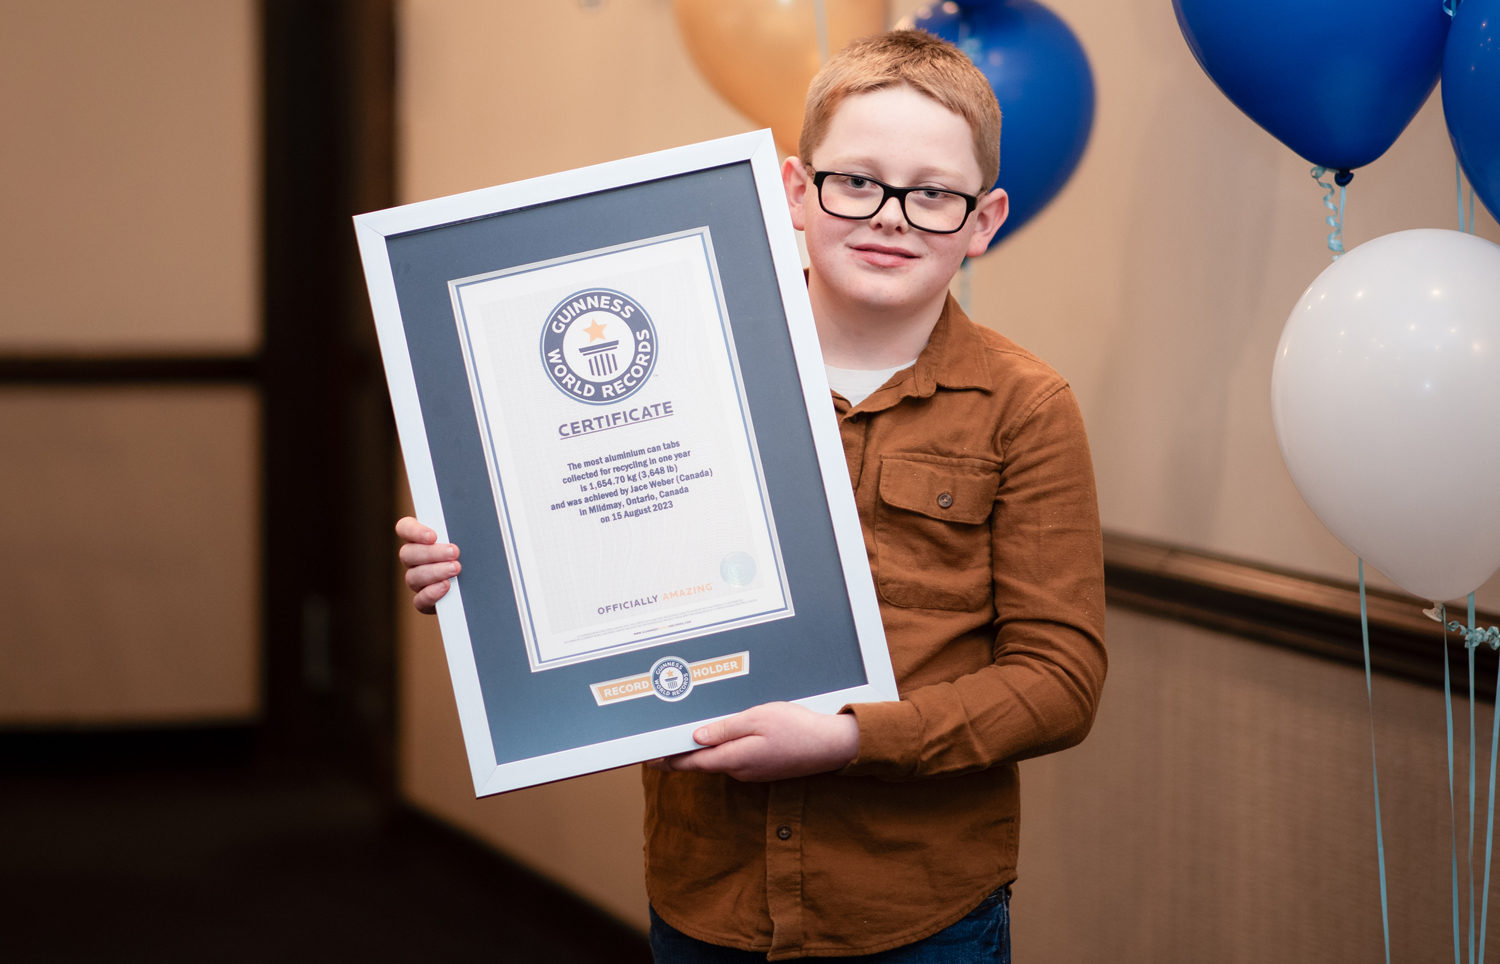 A 10-year-old child poses while holding a certificate from Guinness World Records.